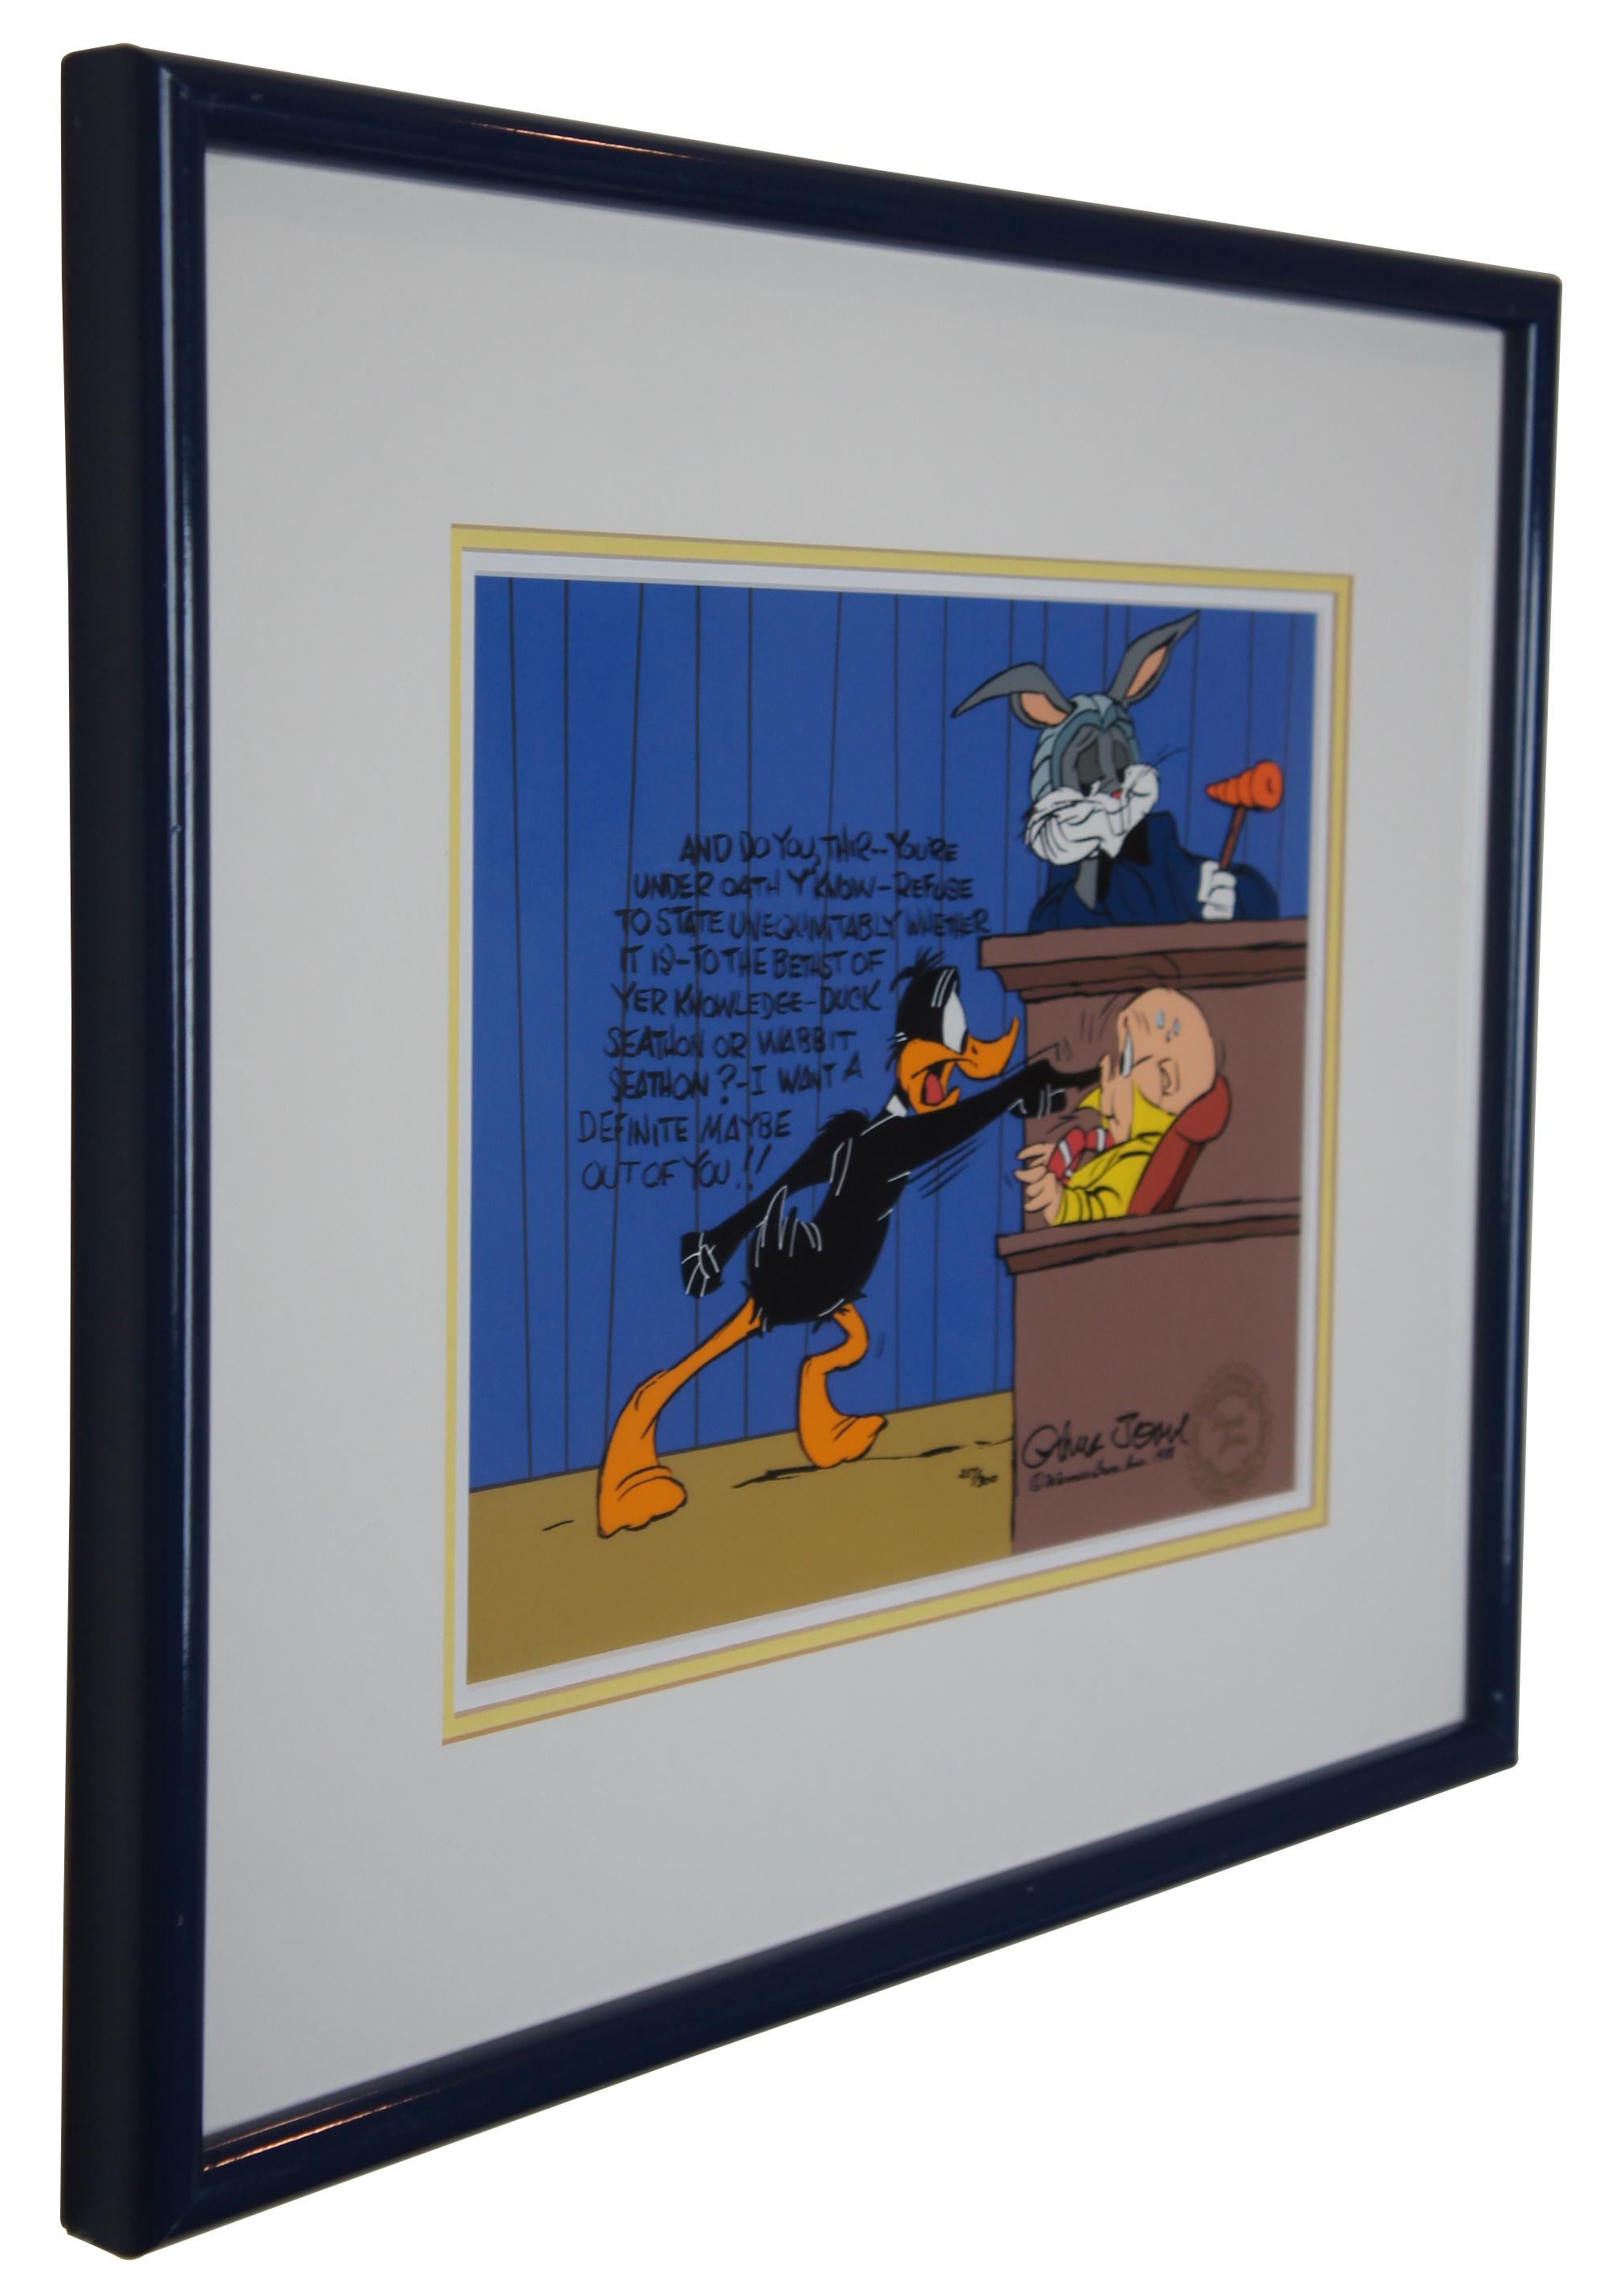 Vintage framed 1988 limited edition hand painted Looney Tunes / Warner Bros / Disney animation cel signed by Chuck Jones, numbered 257/300, stamped as authenticated by Linda Jones Enterprises Inc. Features Bugs Bunny rabbit as a judge, presiding